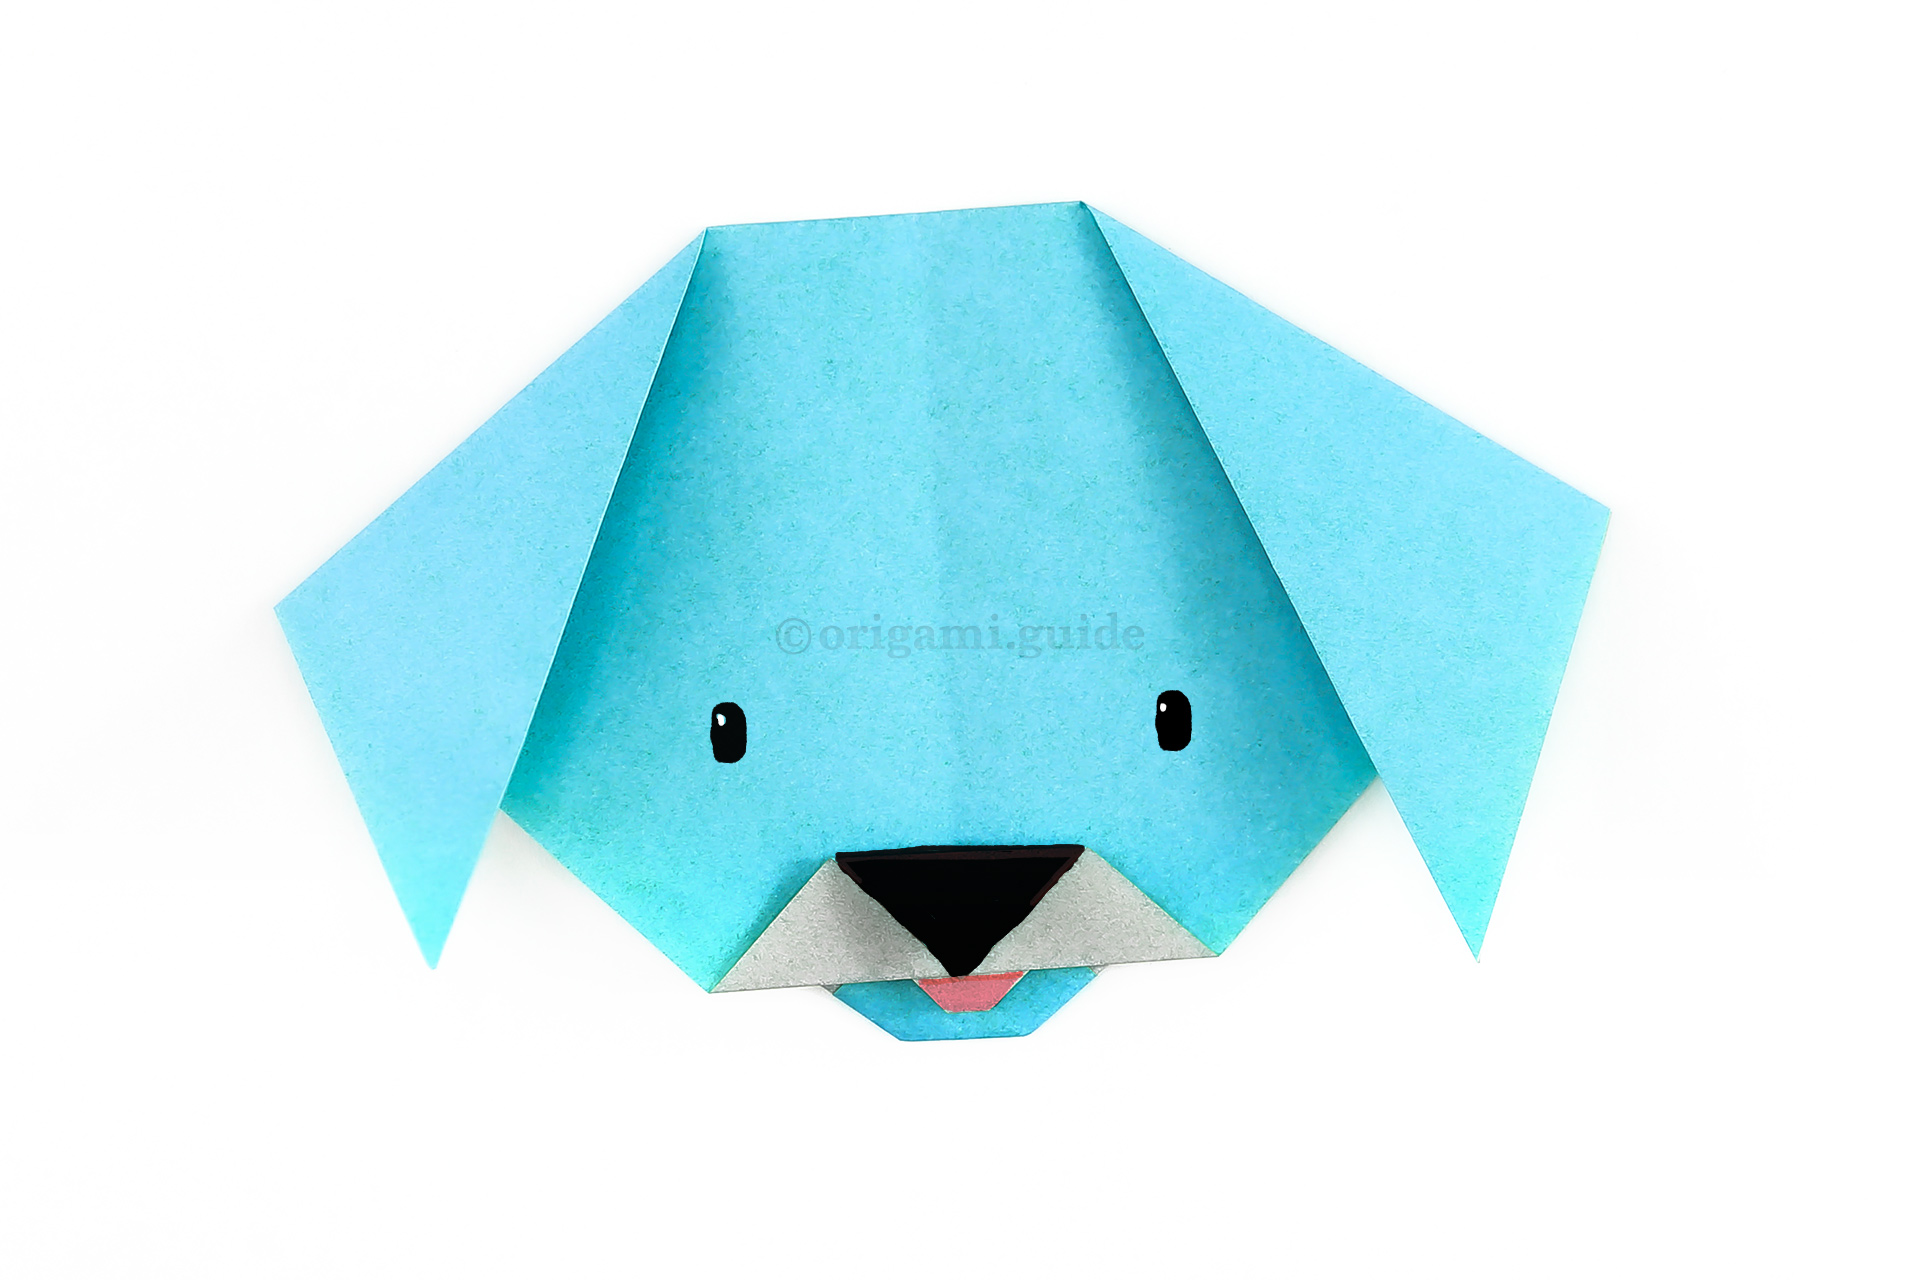 Finally, you can draw a face on your origami dog, even use some pens to colour the nose and tongue.